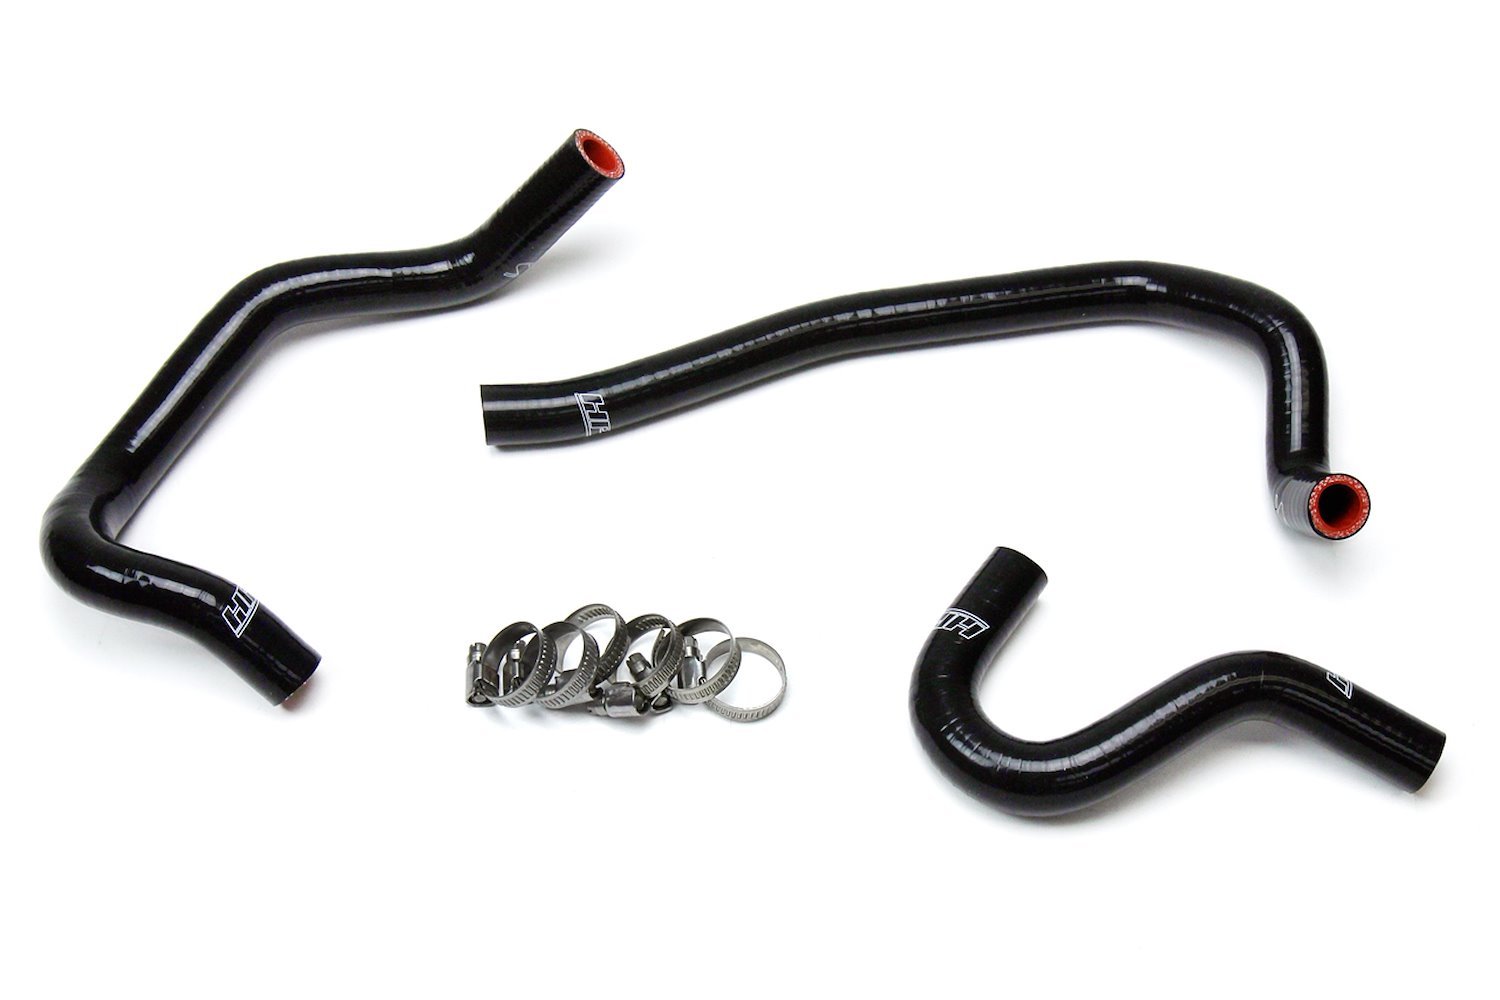 57-1520-BLK Heater Hose Kit, High-Temp 3-Ply Reinforced Silicone, Replace OEM Rubber Heater Coolant Hoses